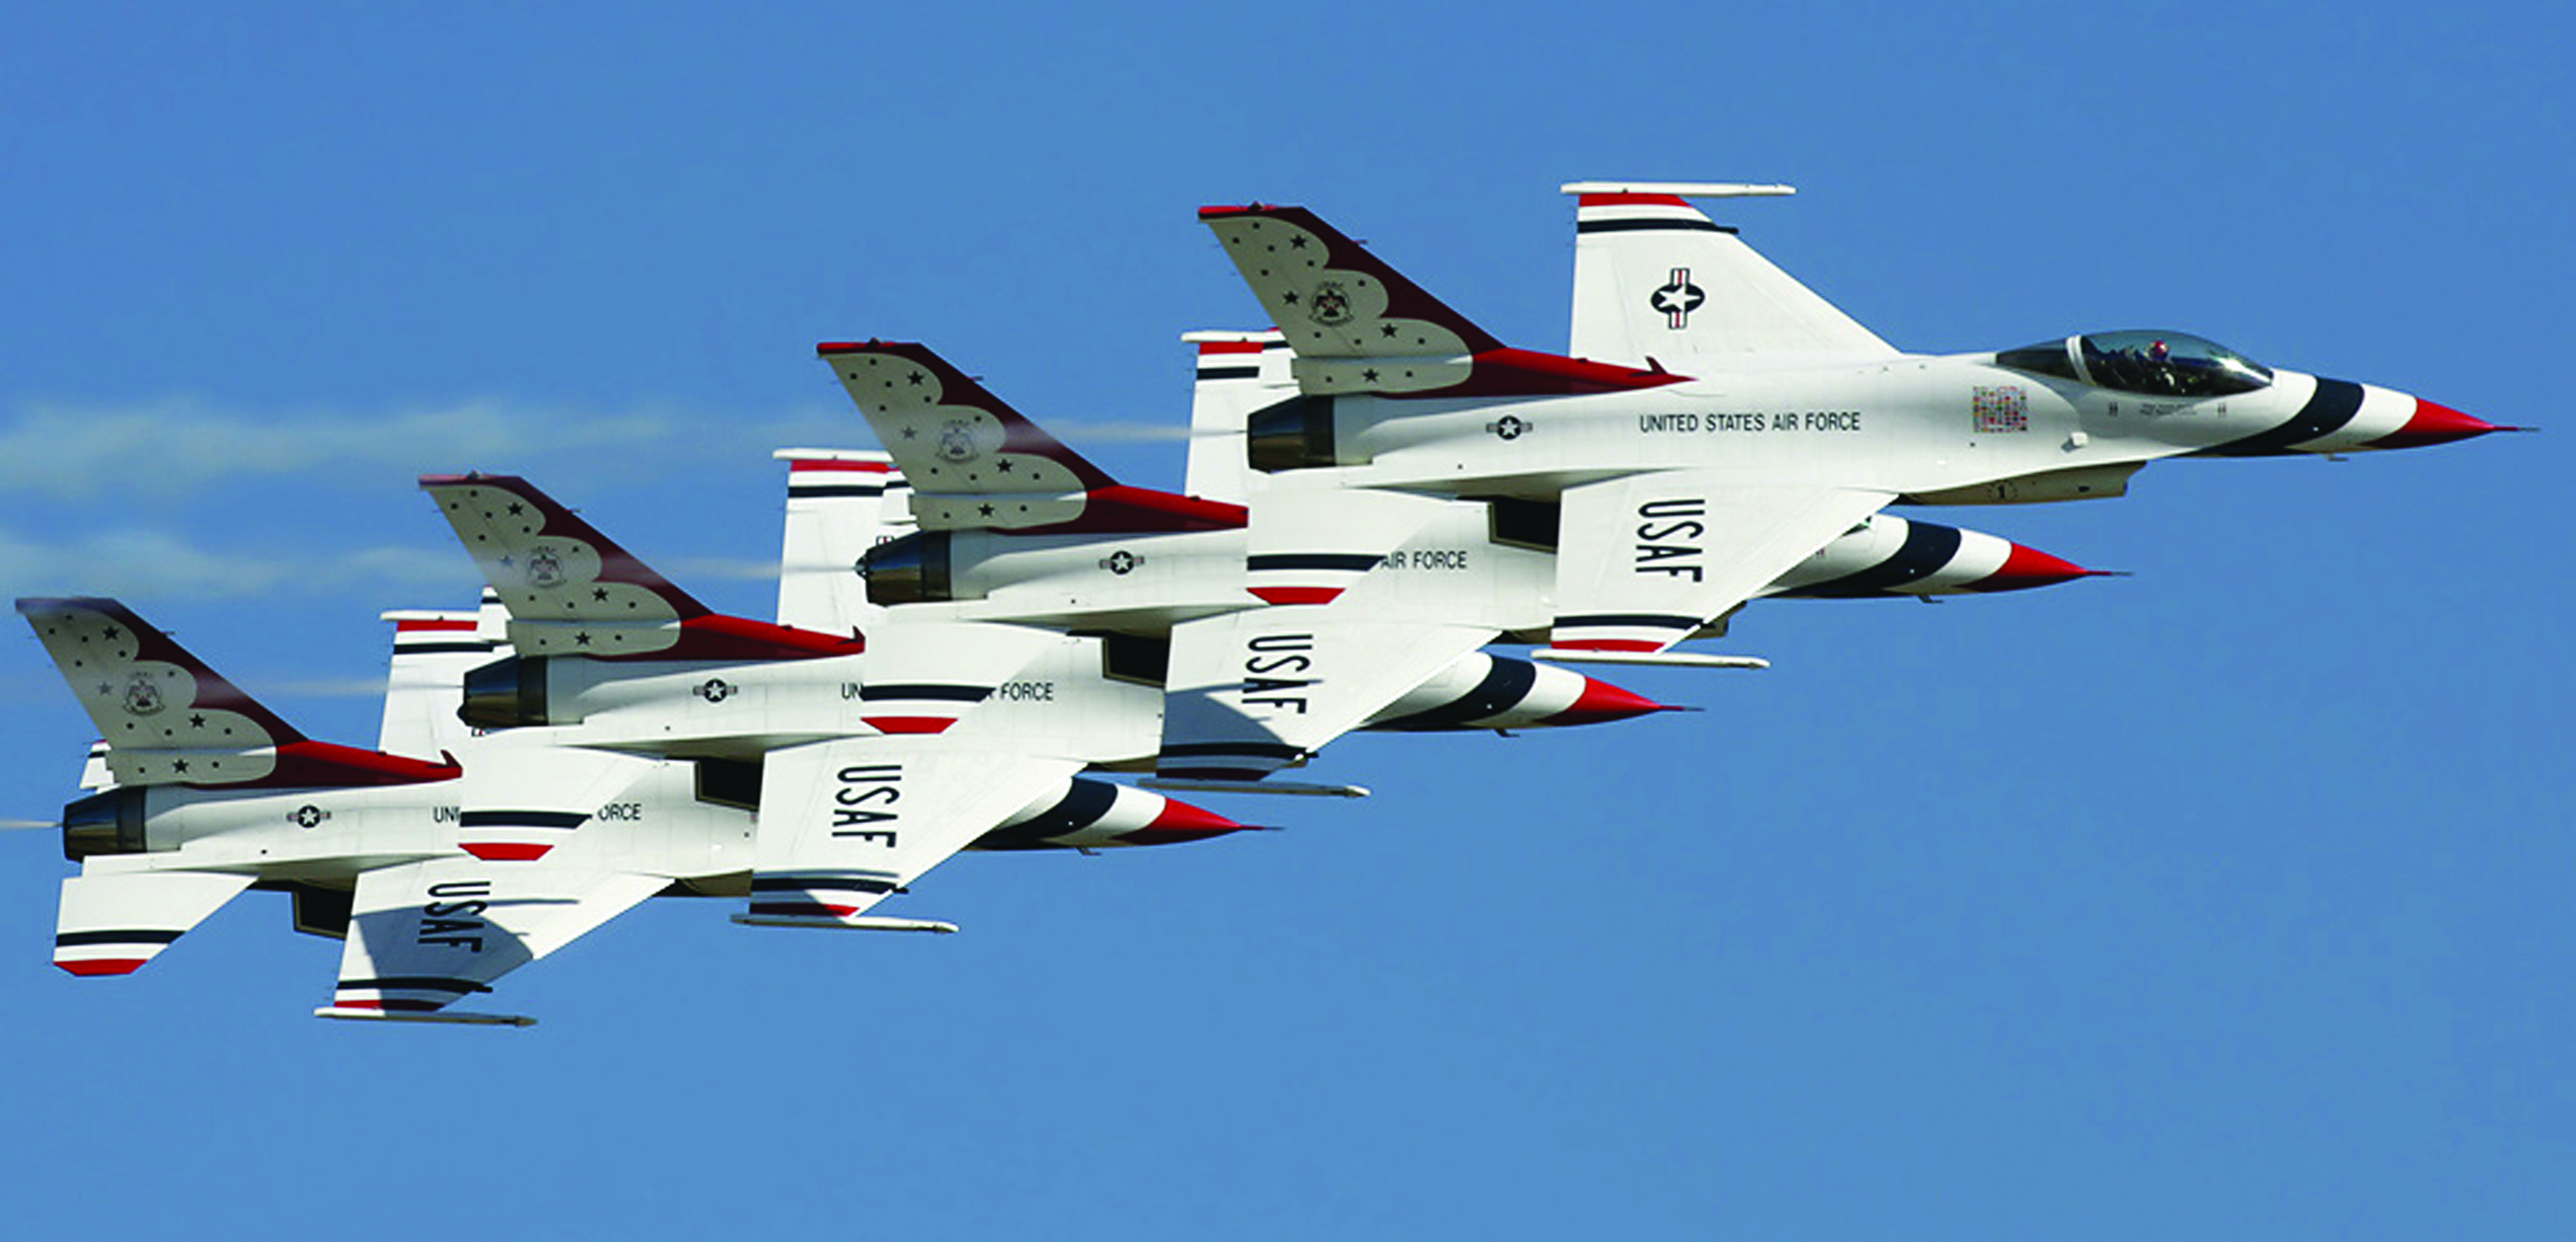 United States Air Force Thunderbirds Backgrounds, Compatible - PC, Mobile, Gadgets| 3000x1446 px